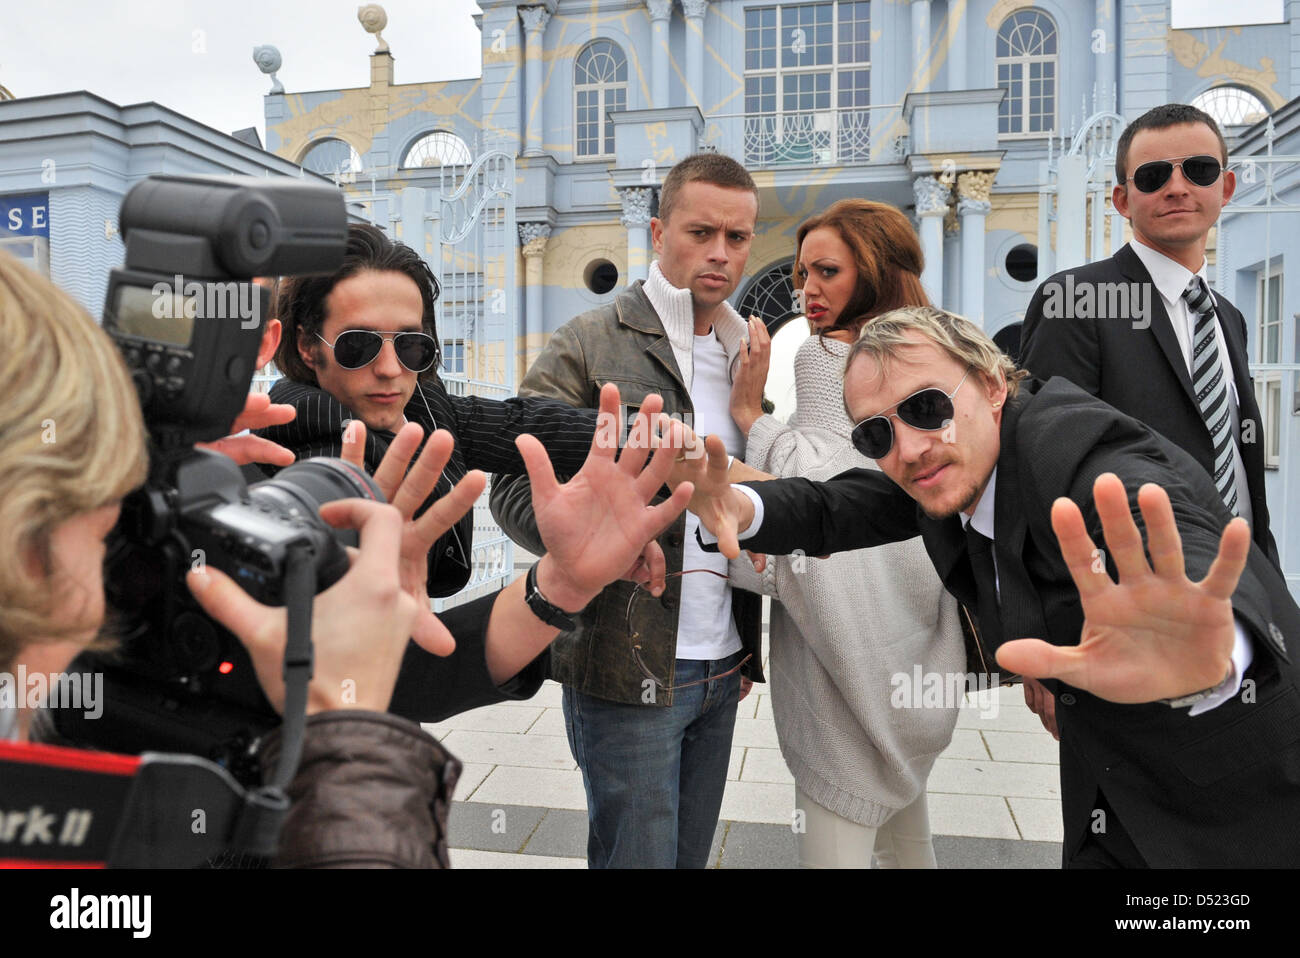 Look-alikes of actor Brad Pitt and actress Angelina Jolie, Samuel Brown and Dorien Rose Duinker, pose with their bodyguards at the Belantis amusement park in Leipzig, Germany, 14 October 2010. Dorien was playmate of the year 2004 and amazes together with Samuel fans of Angelina and Brad around the globe. Photo: Hendrik Schmidt Stock Photo